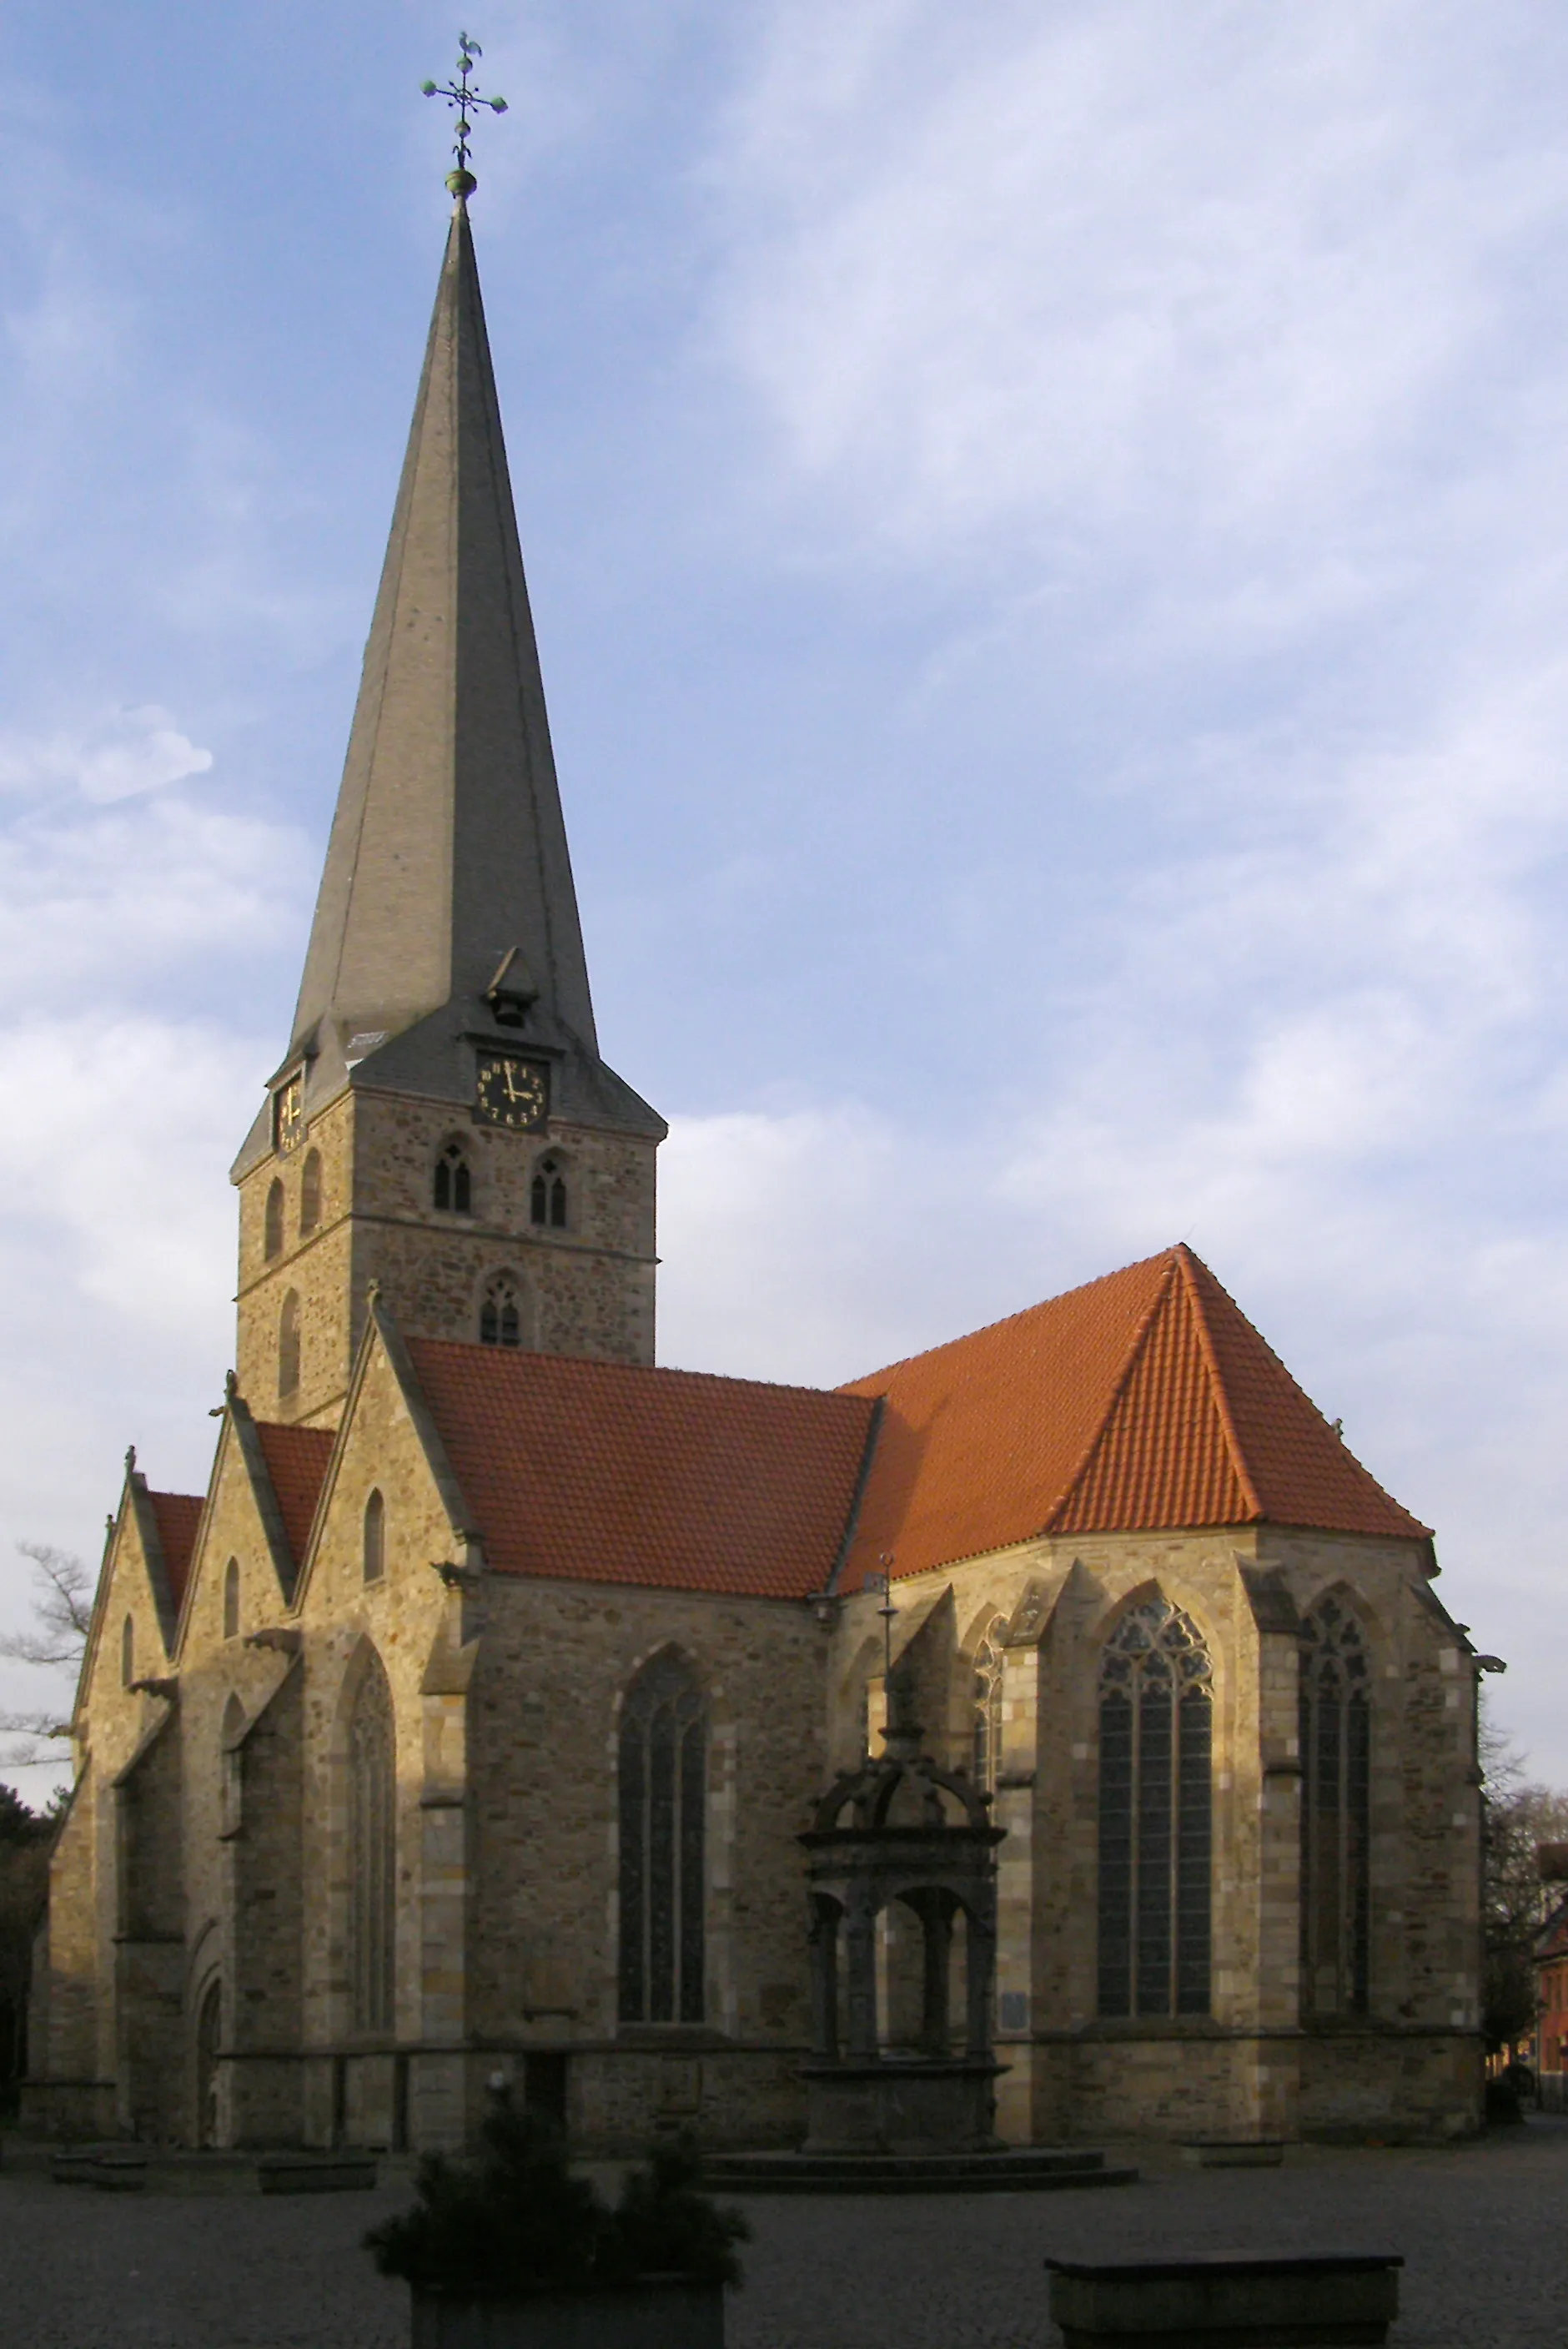 Photo showing: St. Johannis in town of Herford, District of Herford, North Rhine-Westphalia, Germany.